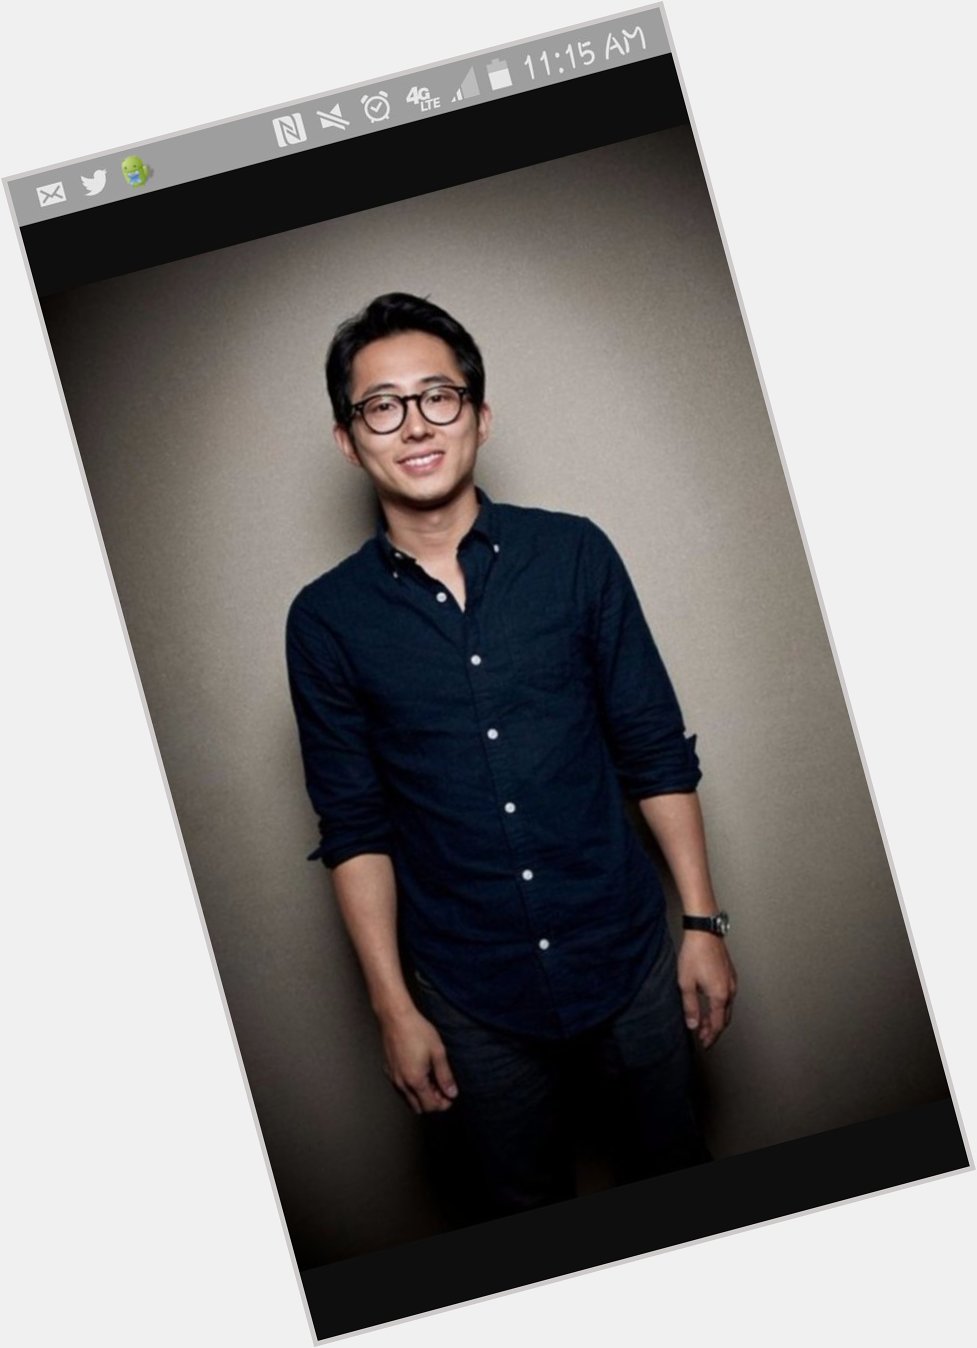 Happy birthday Steven yeun! hope you have a great day!!!! 